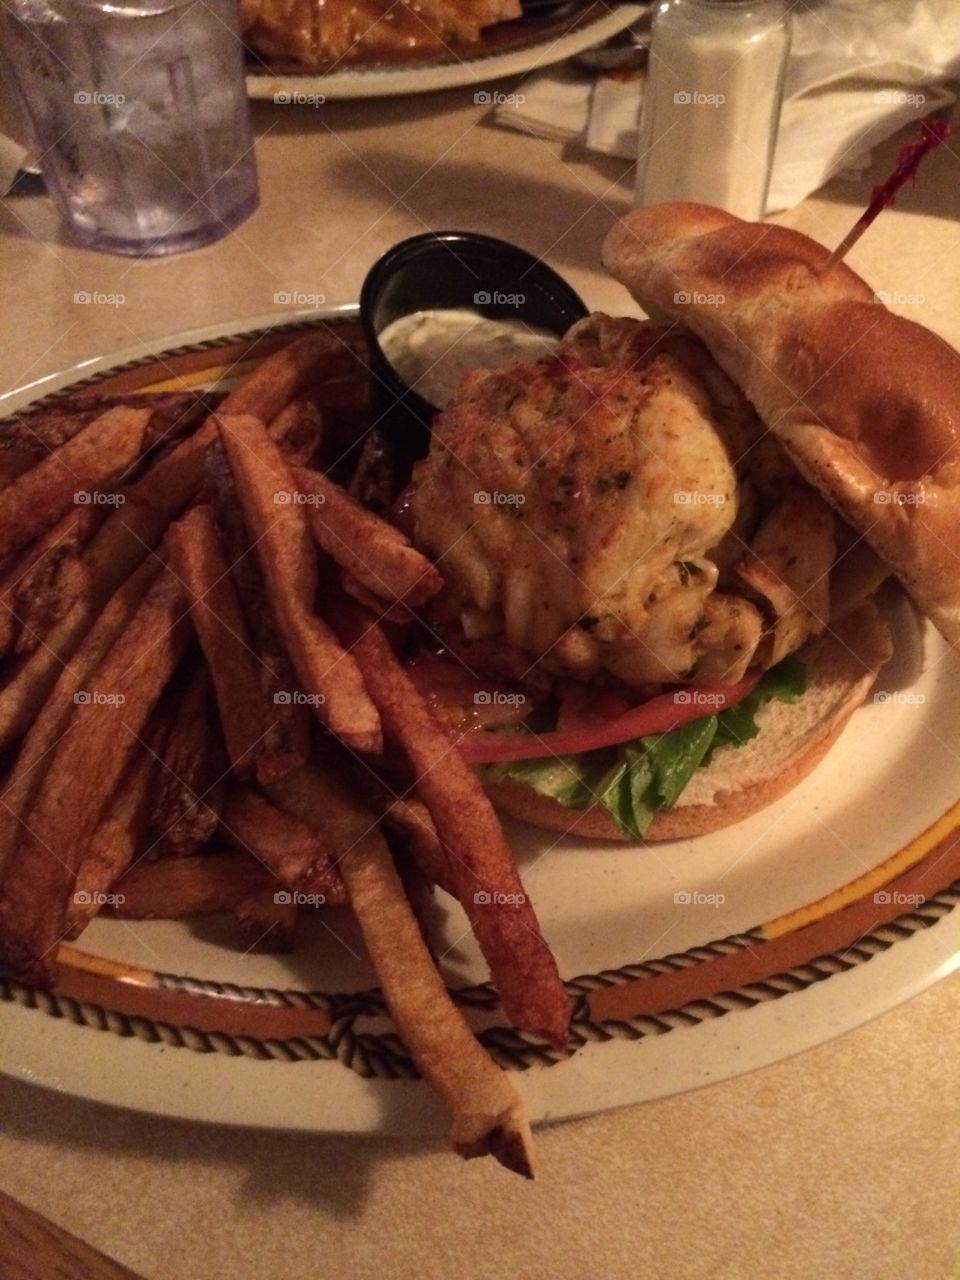 Is a crab cake sandwich and fries not the most perfect meal?